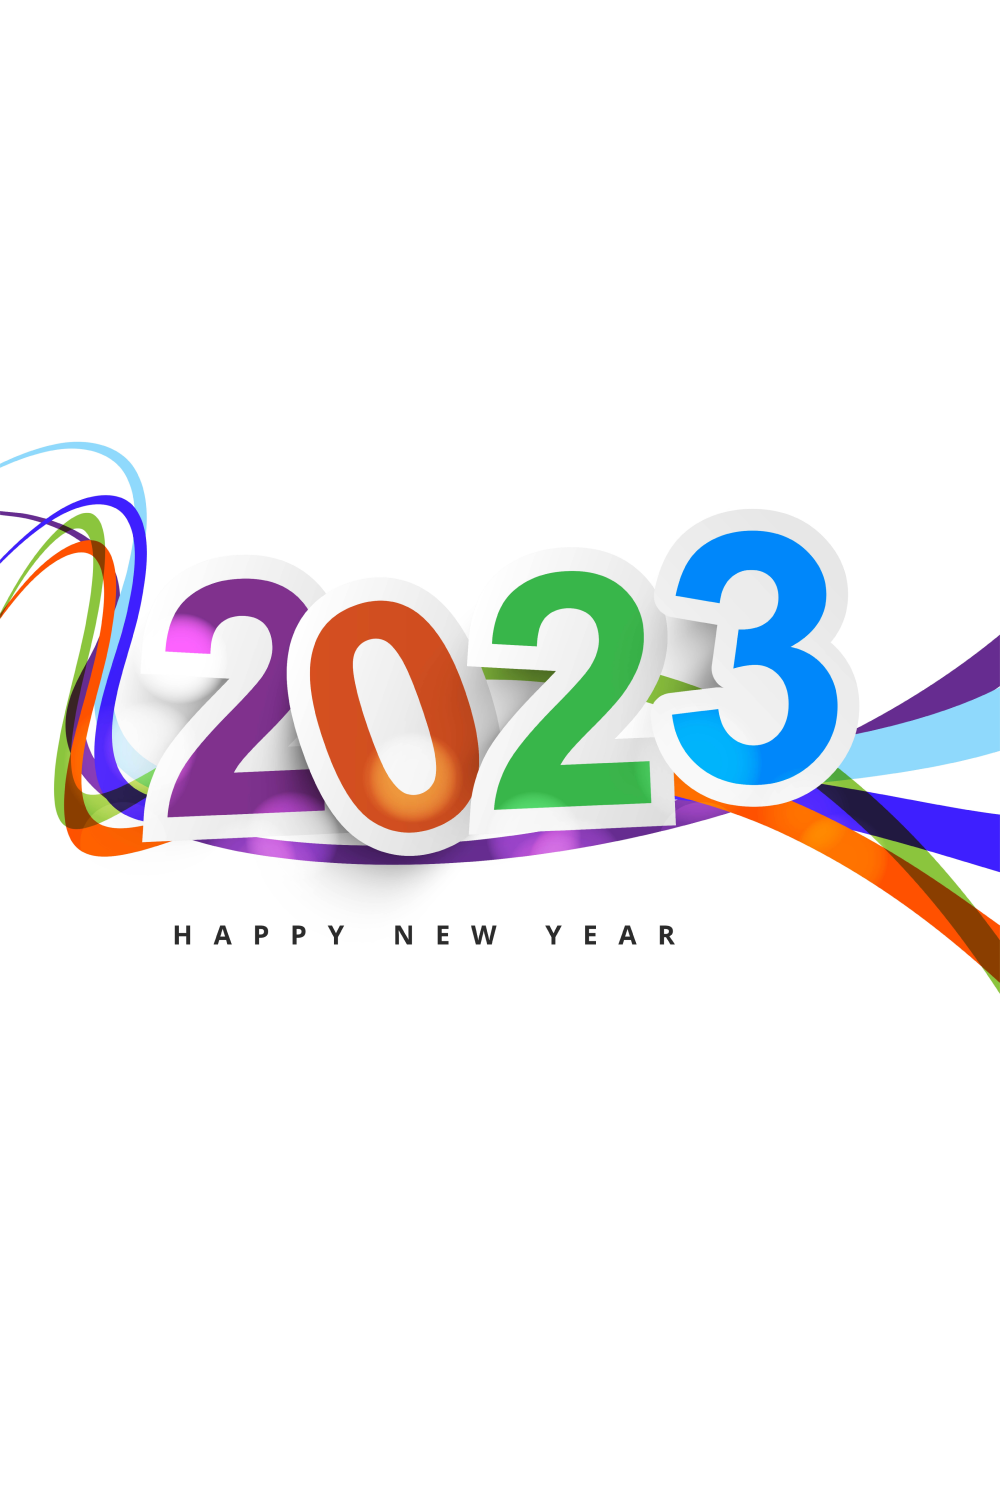 Colorful Happy New Year Banner Design pinterest image.